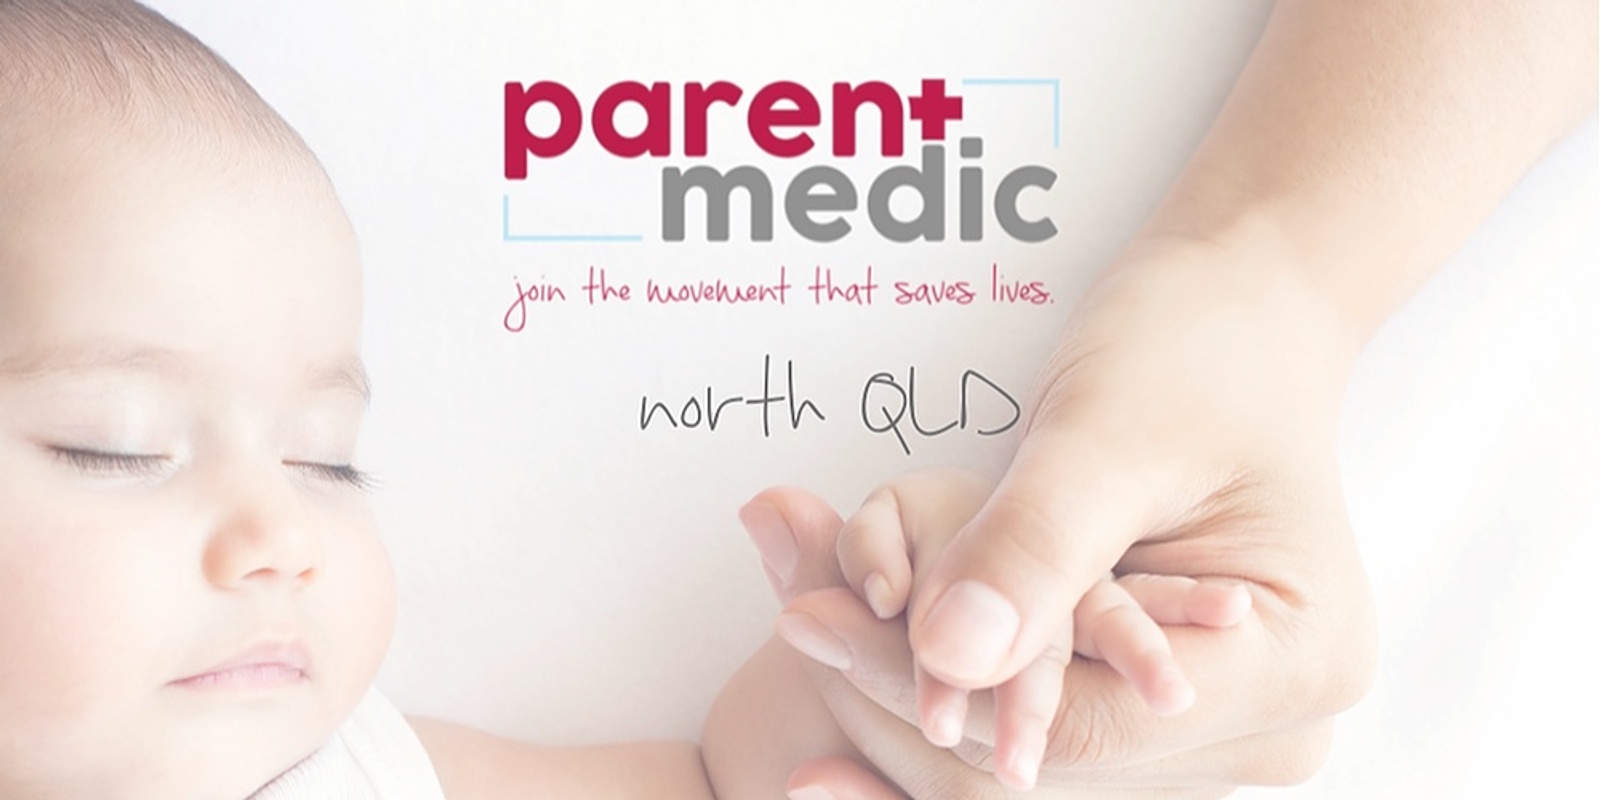 Parentmedic Townsville Baby/Child First Aid